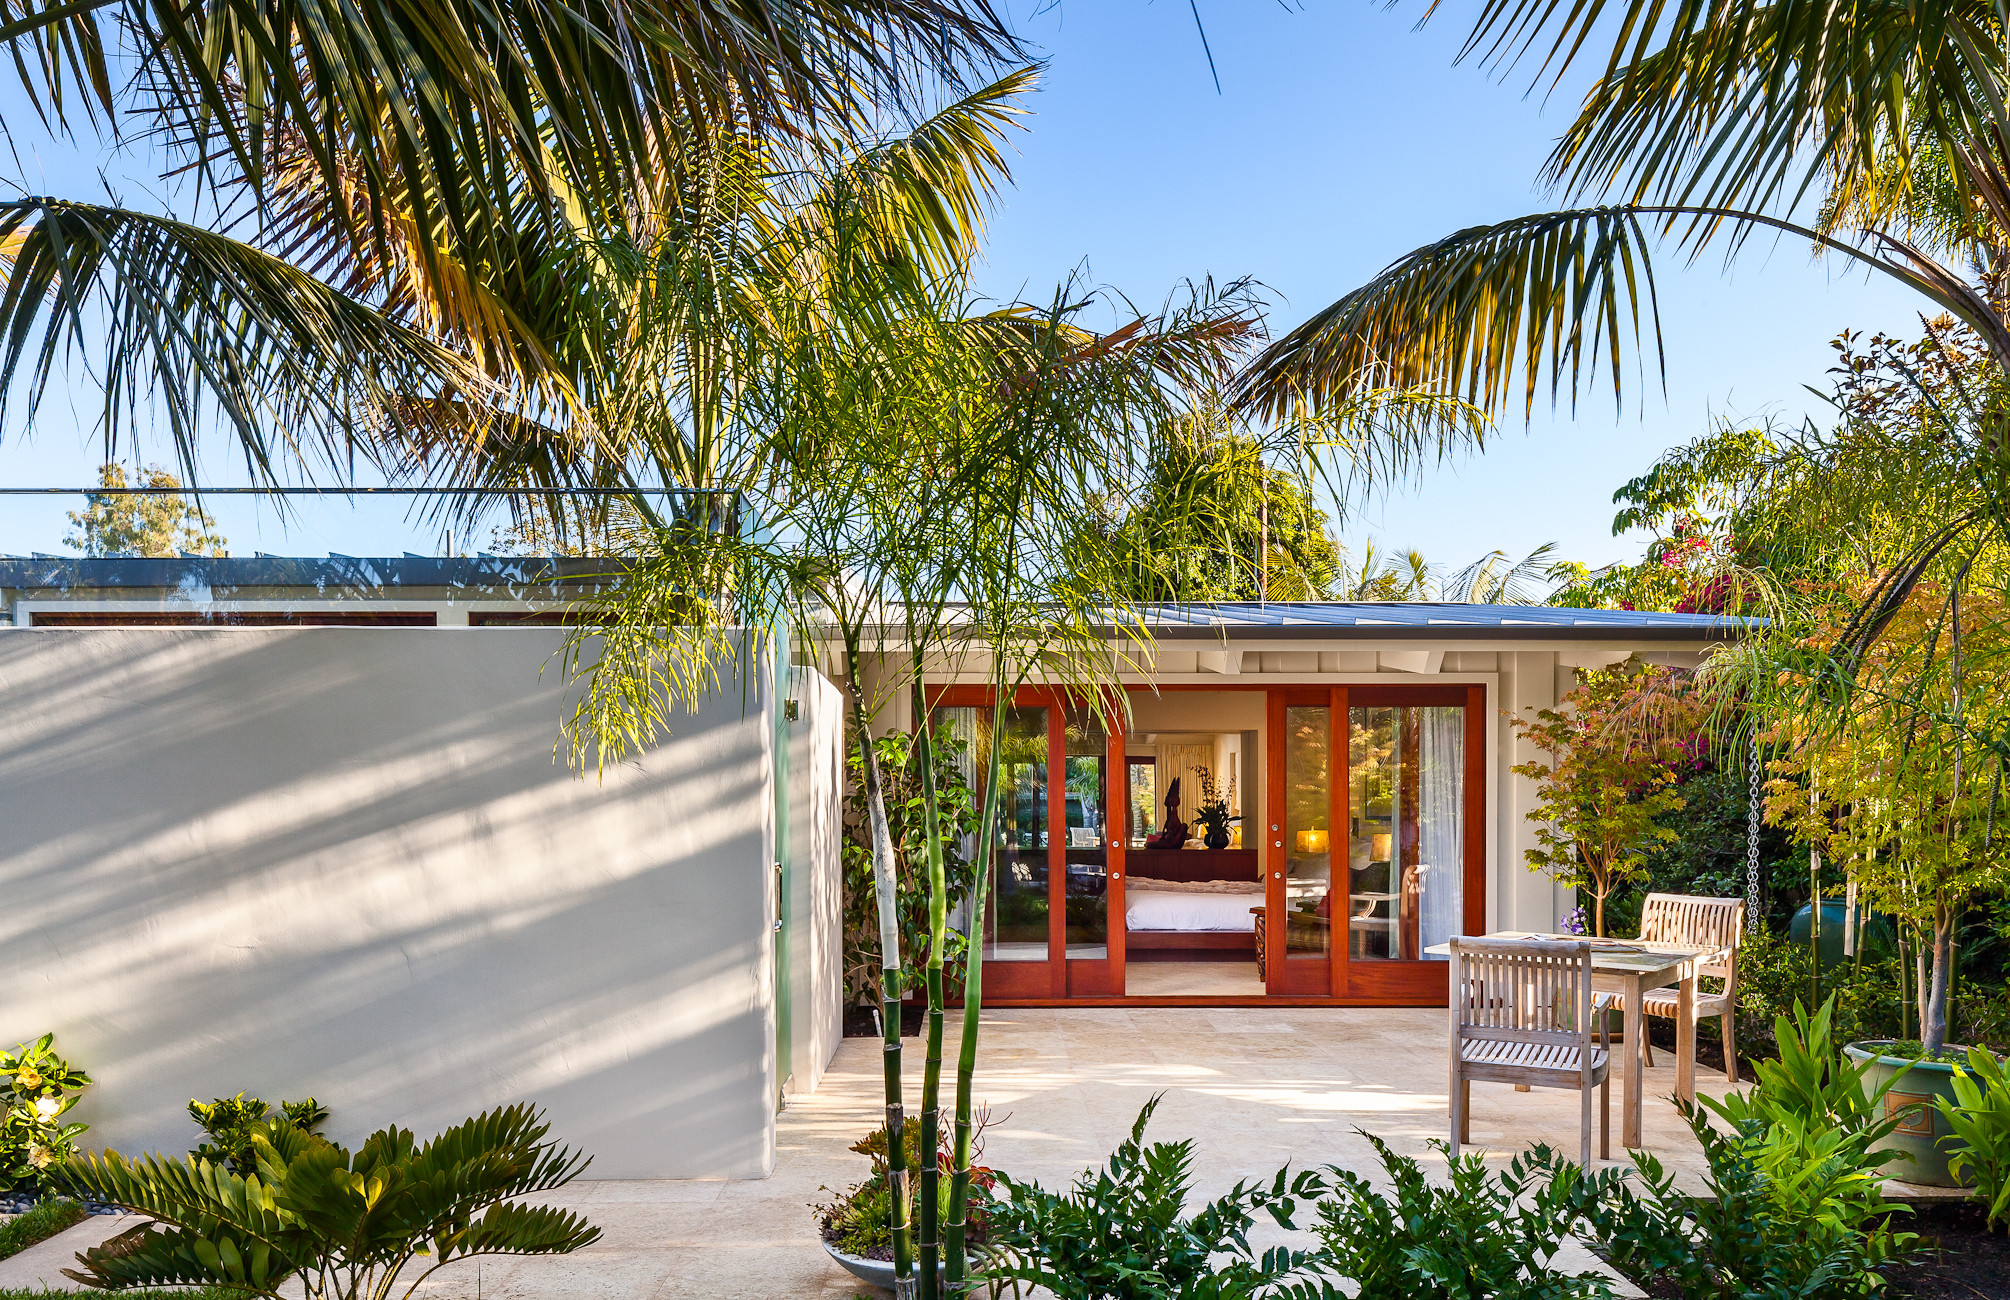 butterfly beach villa neumann mendro andrulaitis architects llp imgf891e5230106ff33 14 6790 1 4ddb353